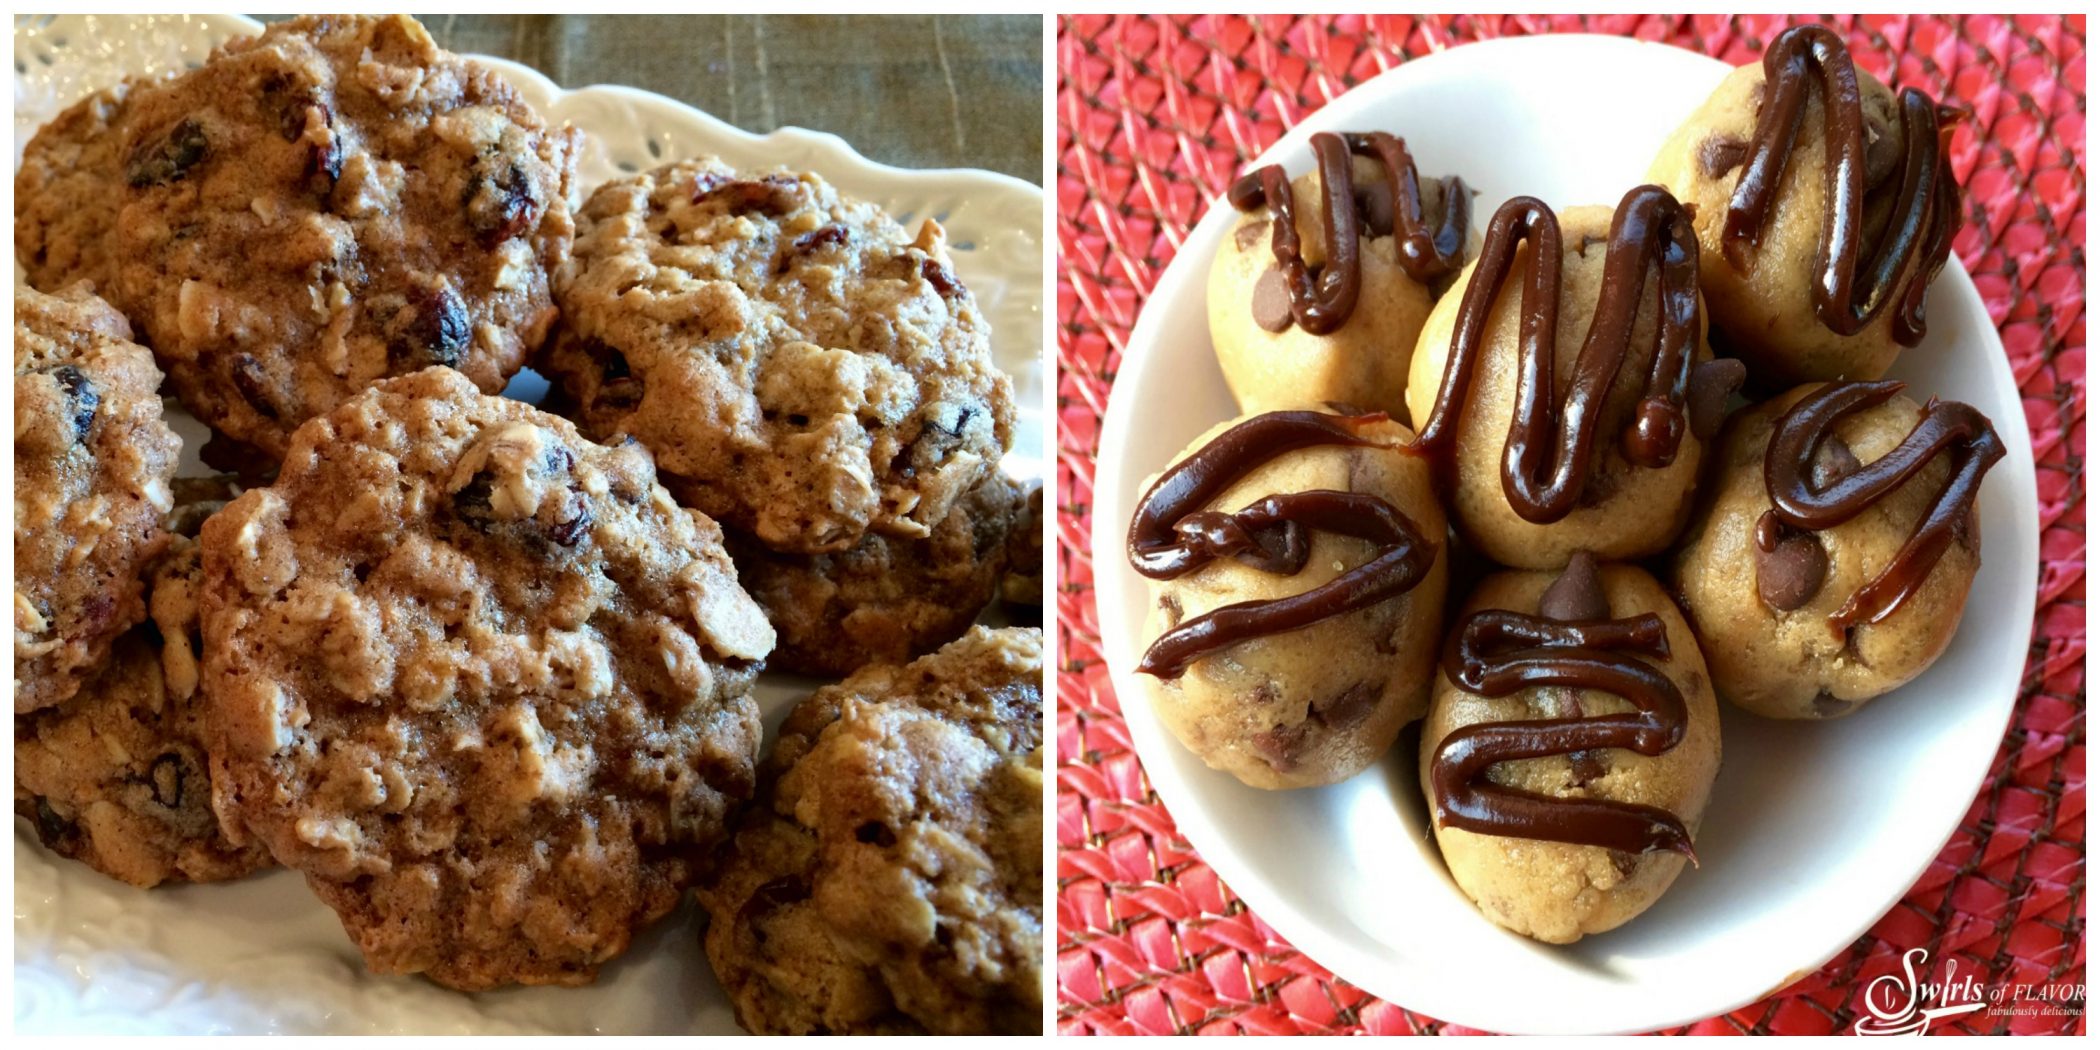 Cranberry Almond Oatmeal Cookies and No Bake Chocolate Chip Cookies